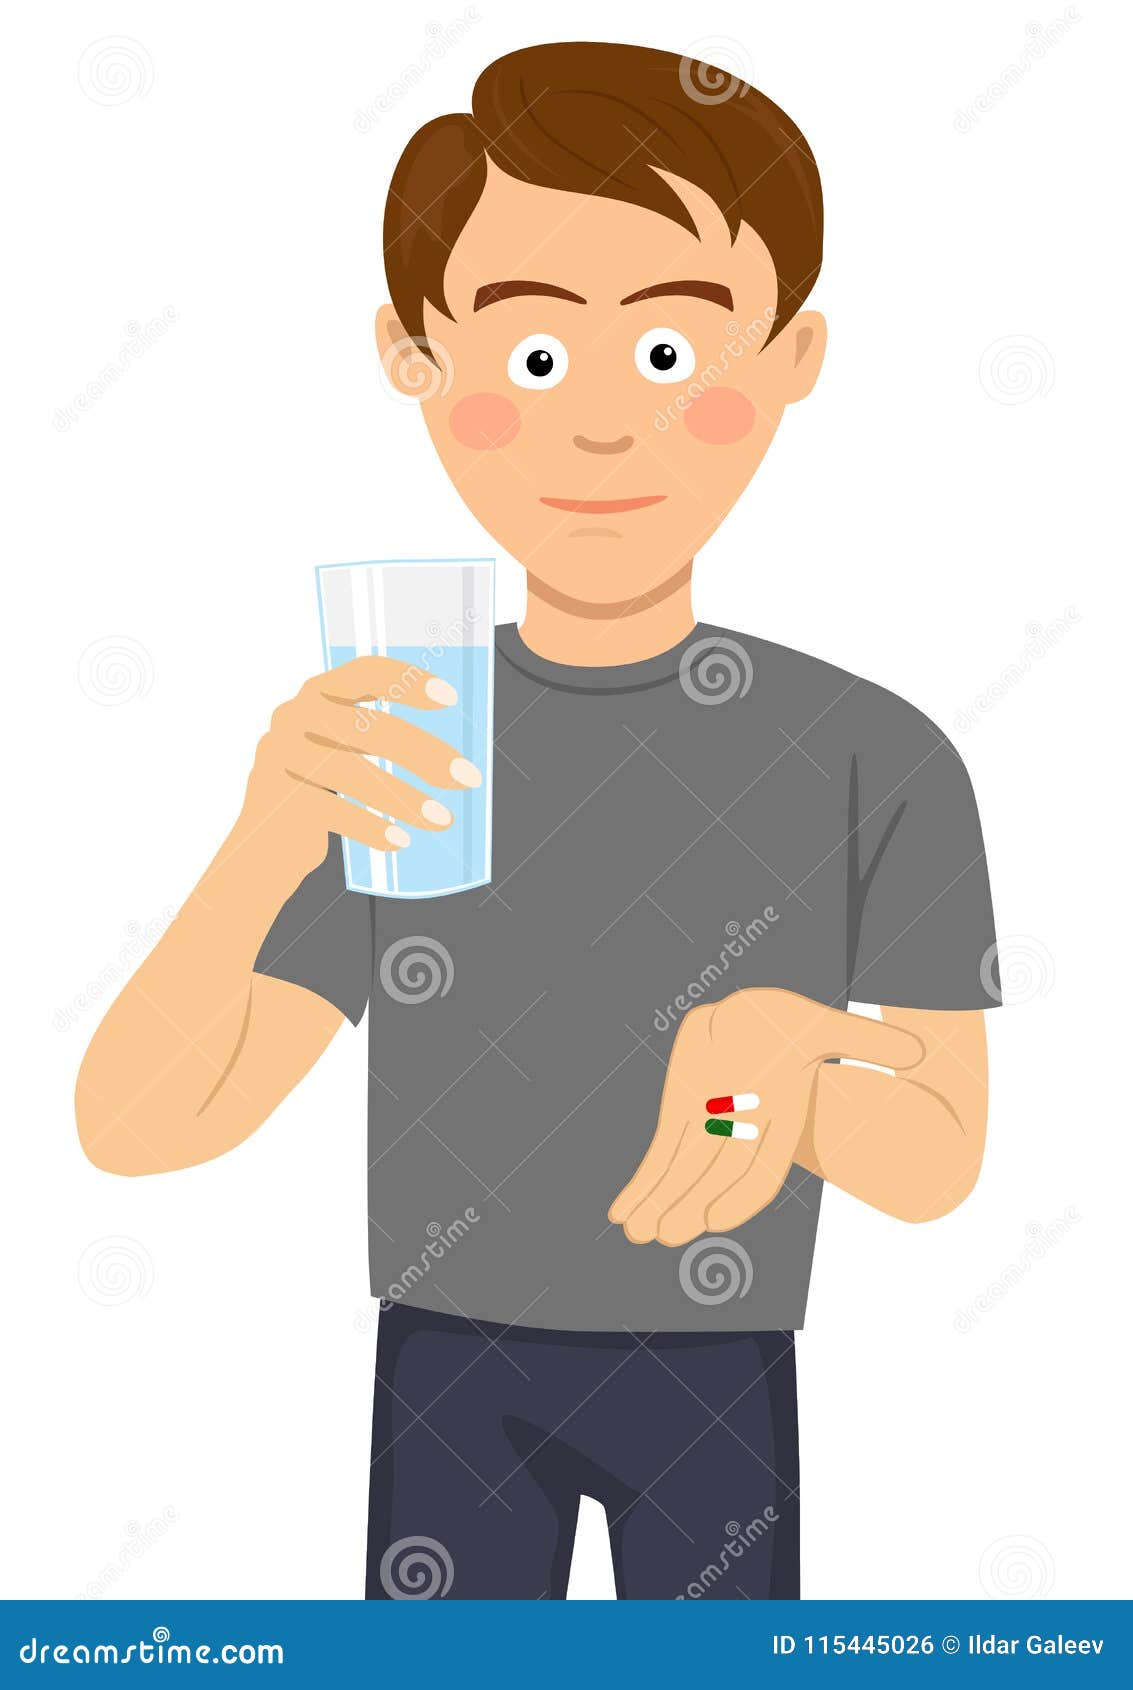 young man is ready to take pills holding a glass of water